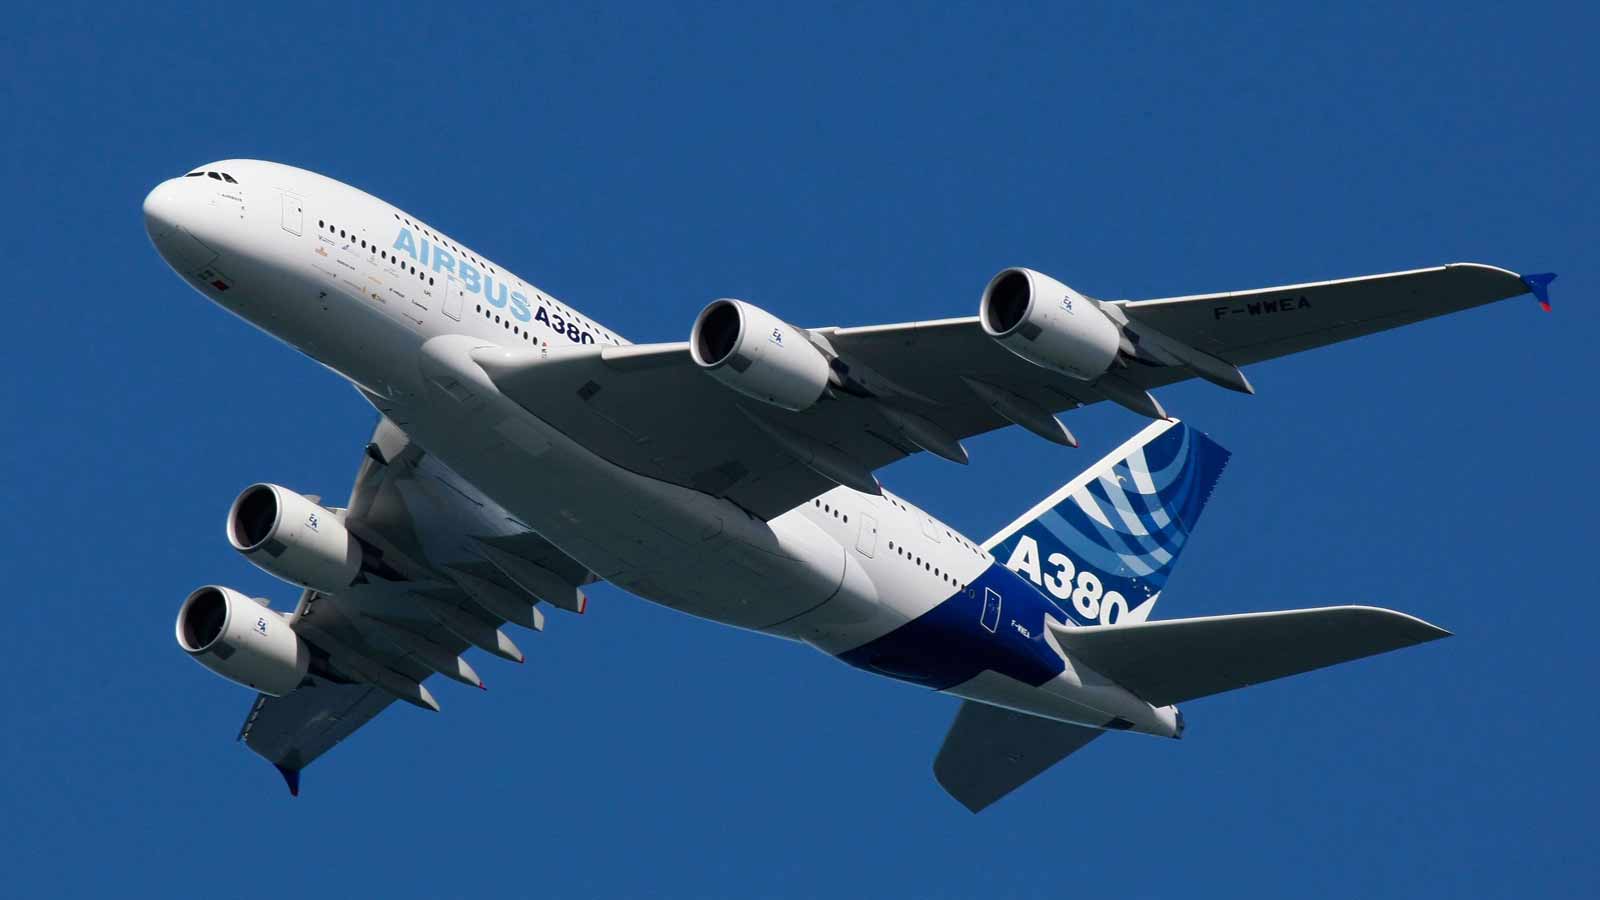 Airbus A380 Makes History Using Cooking Oil As Fuel